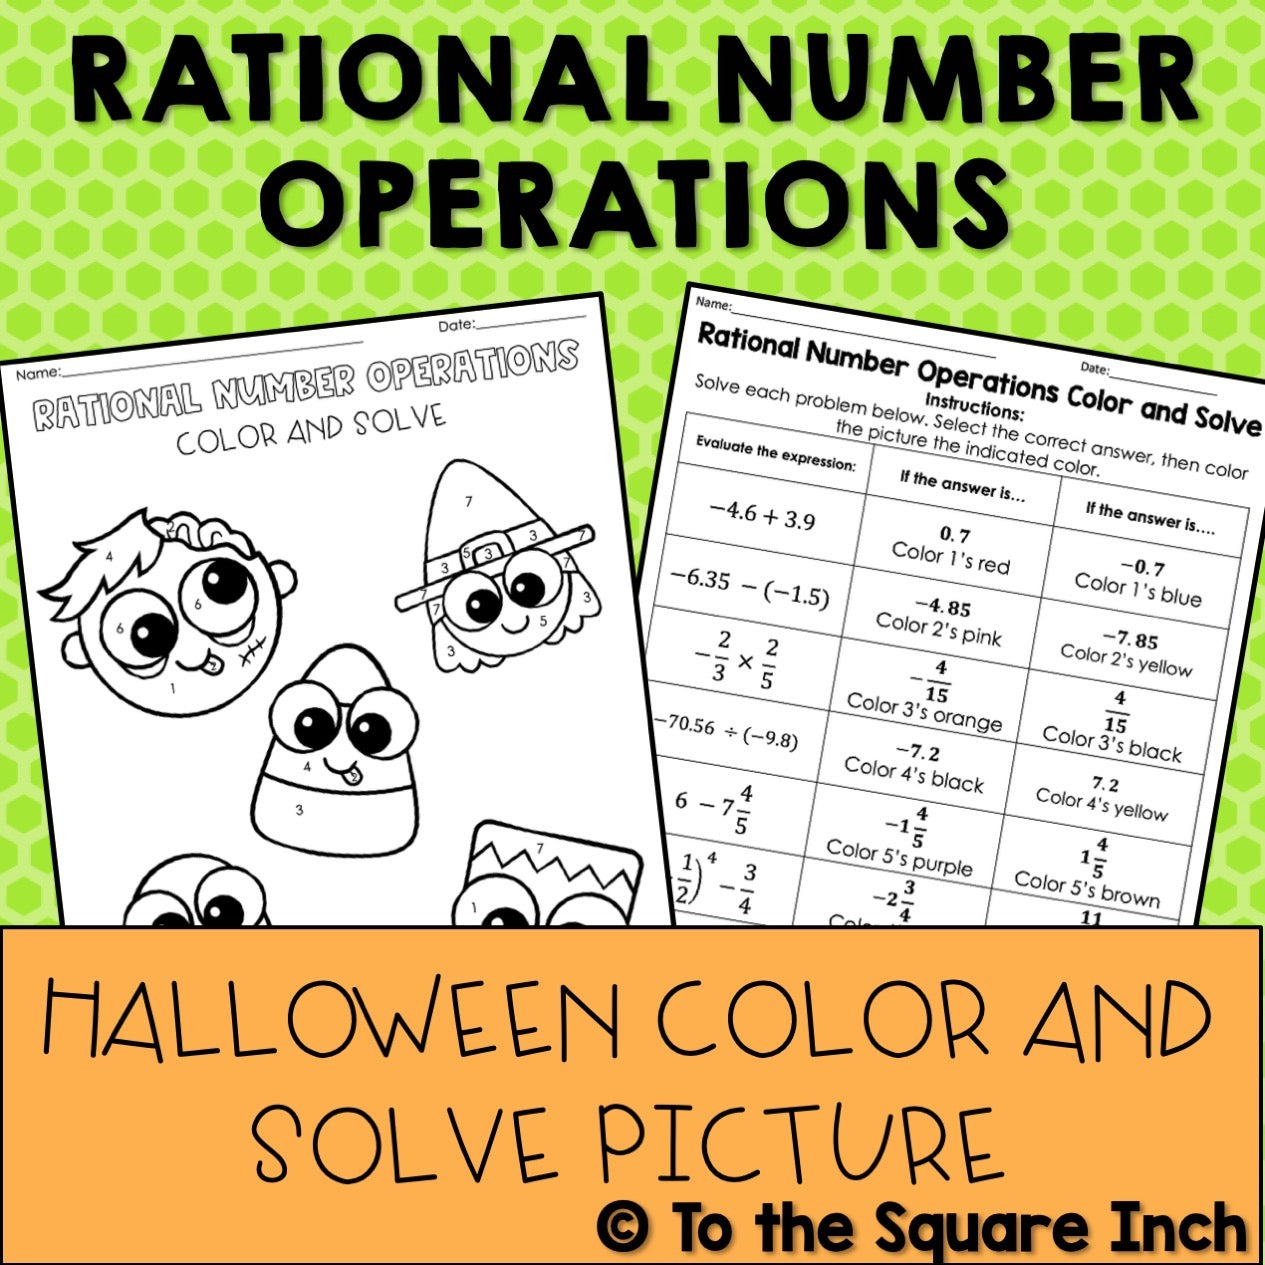 Rational Number Operations Halloween Math Color and Solve